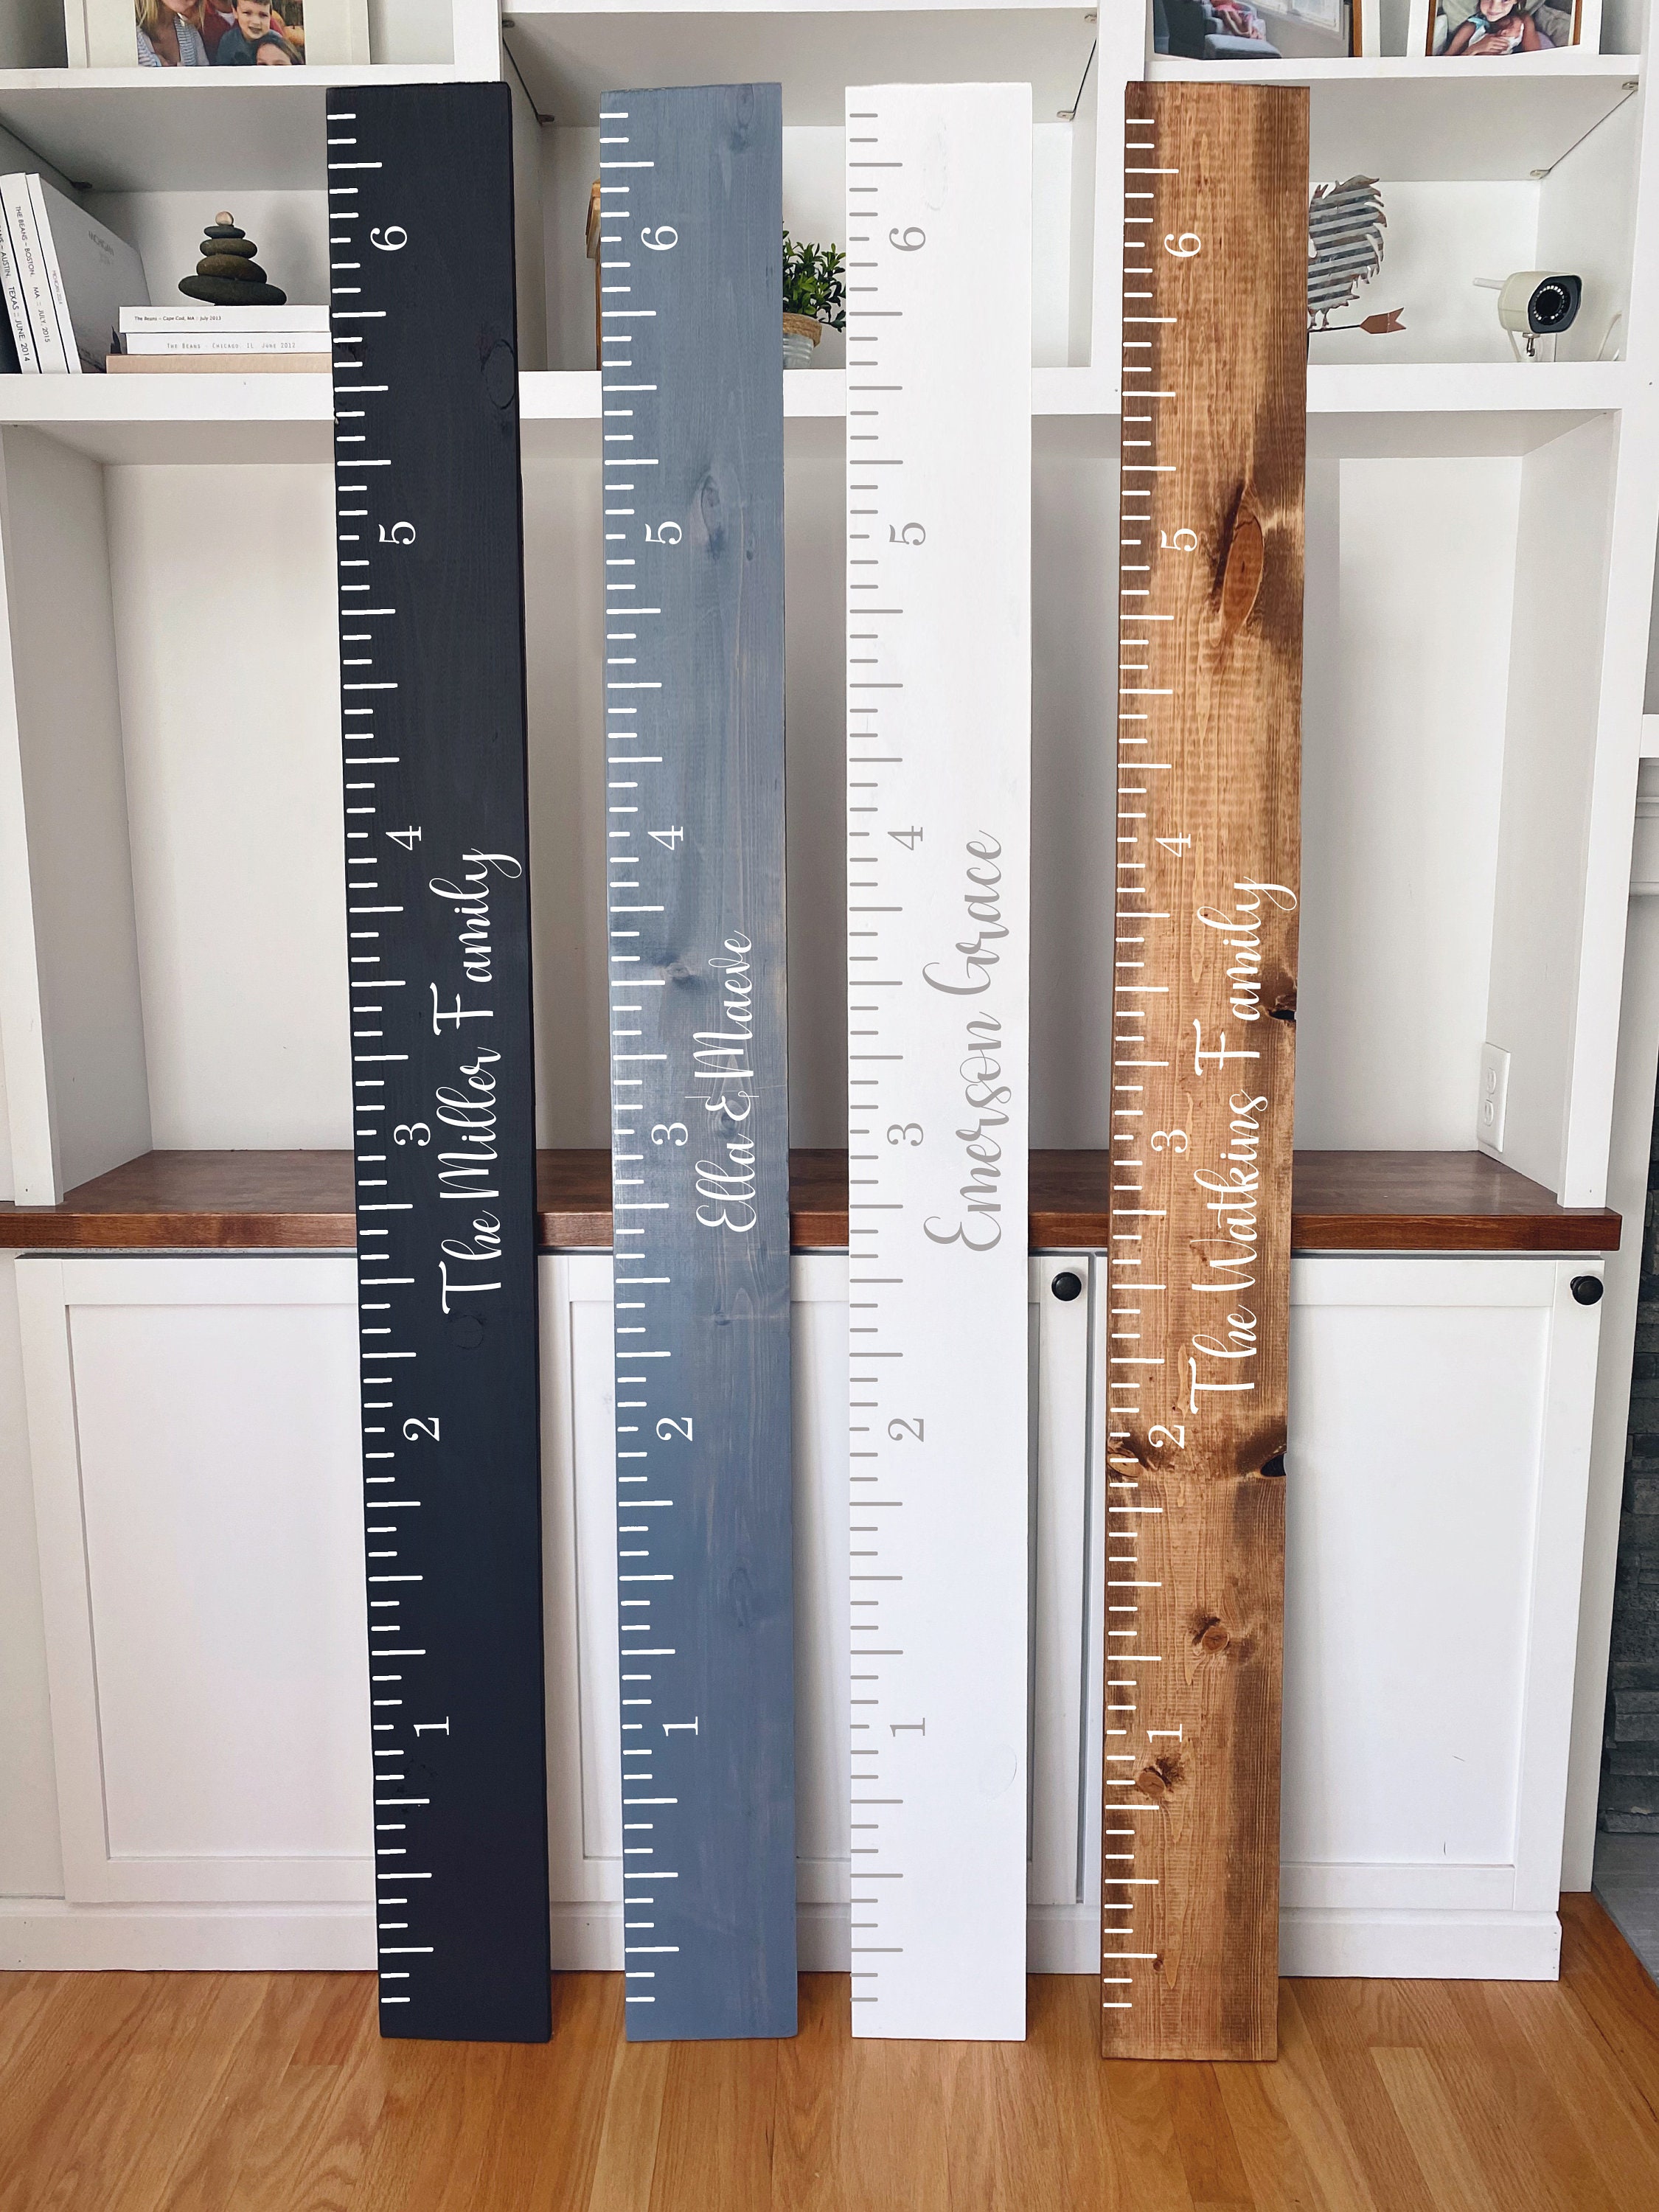 Personalized Wooden Growth chart, growth ruler, kids growth chart,  personalized growth chart, personalized ruler, kids ruler